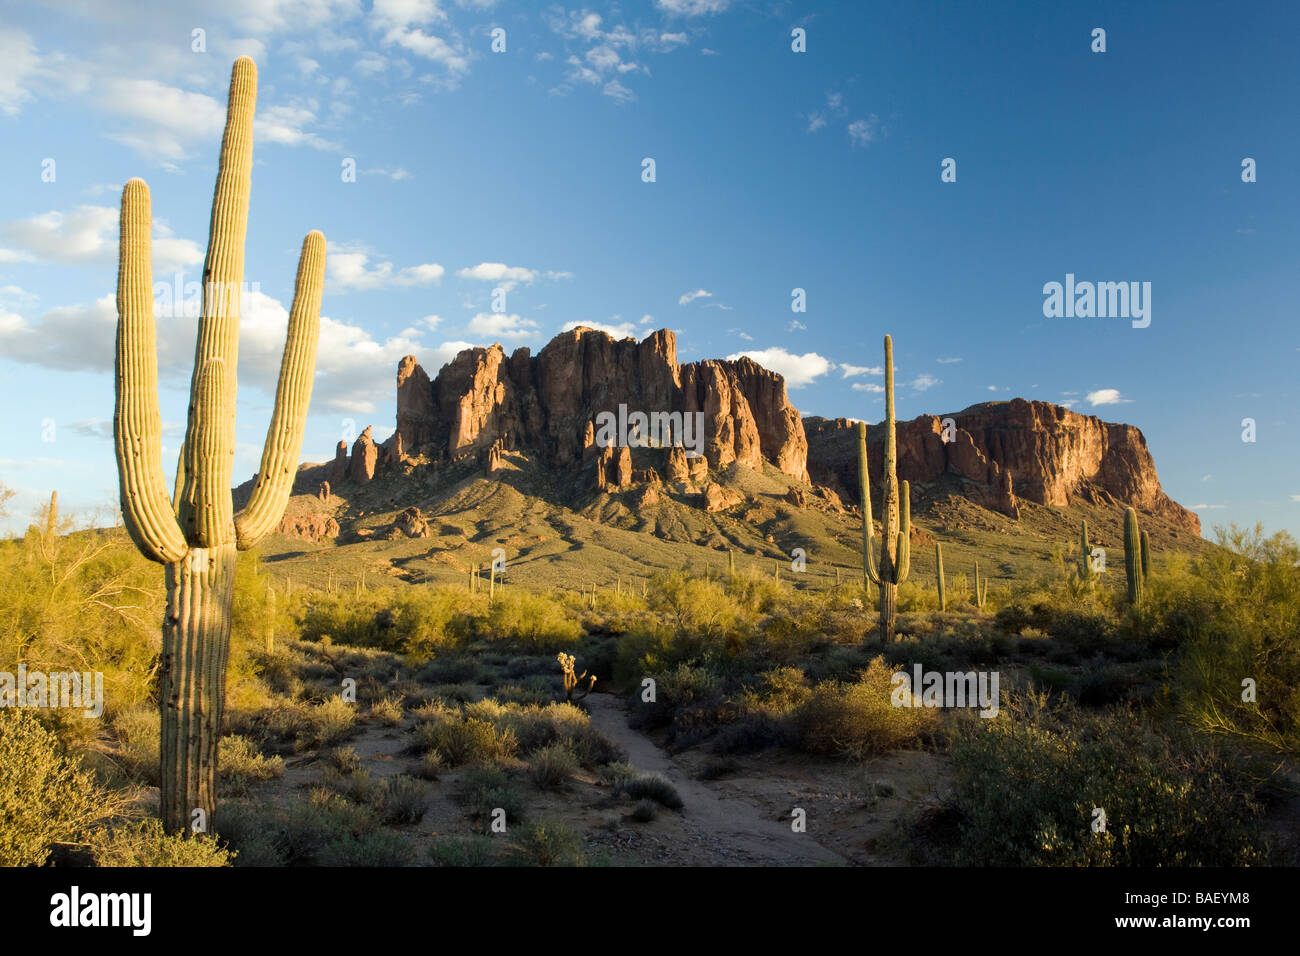 Cactus and Superstition Mountains - Lost Dutchman State Park - Apache Junction, Arizona USA Stock Photo